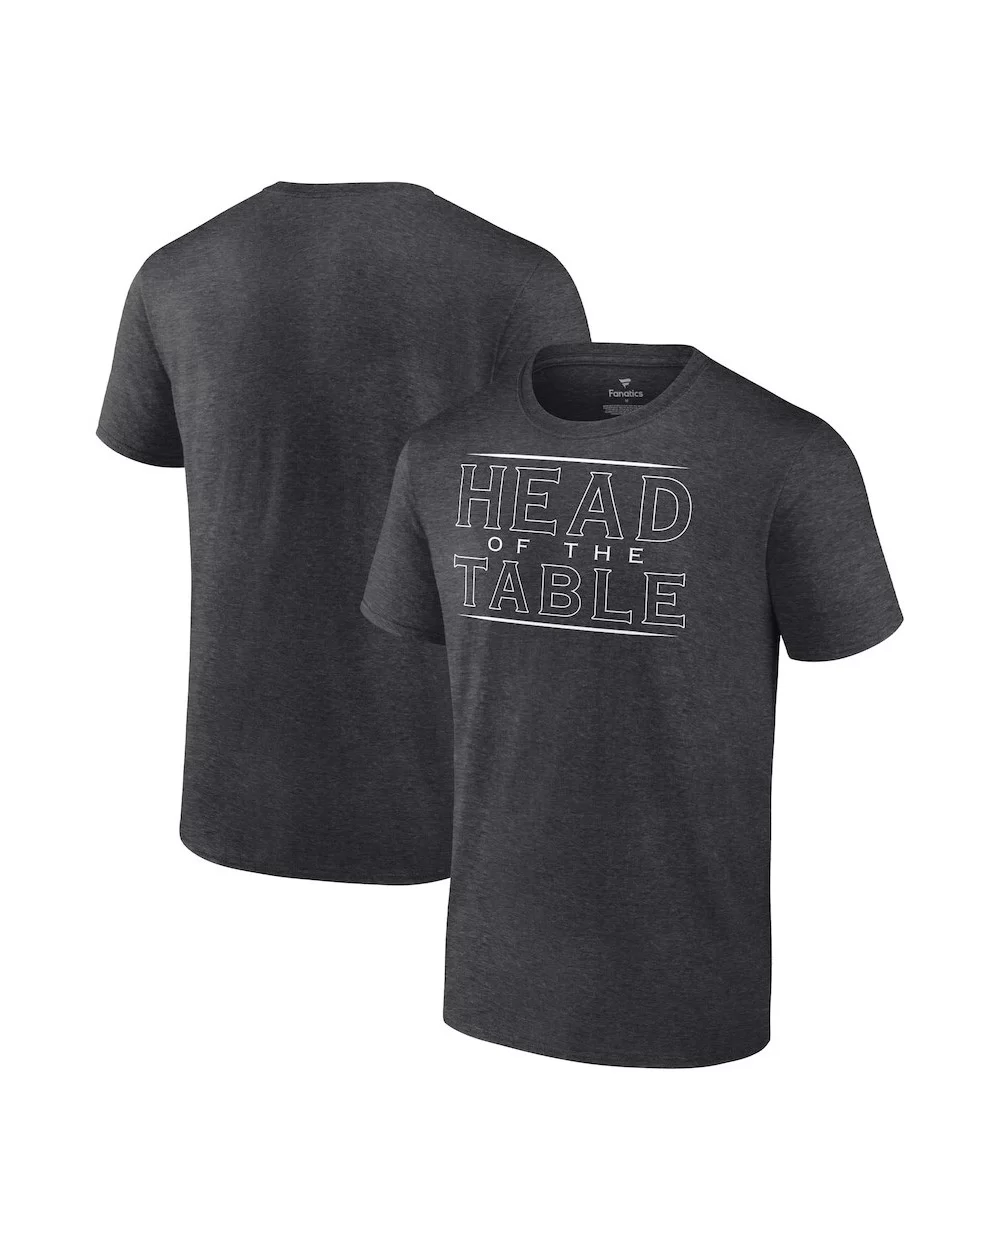 Men's Fanatics Branded Charcoal Roman Reigns Head Of The Table T-Shirt $9.84 T-Shirts